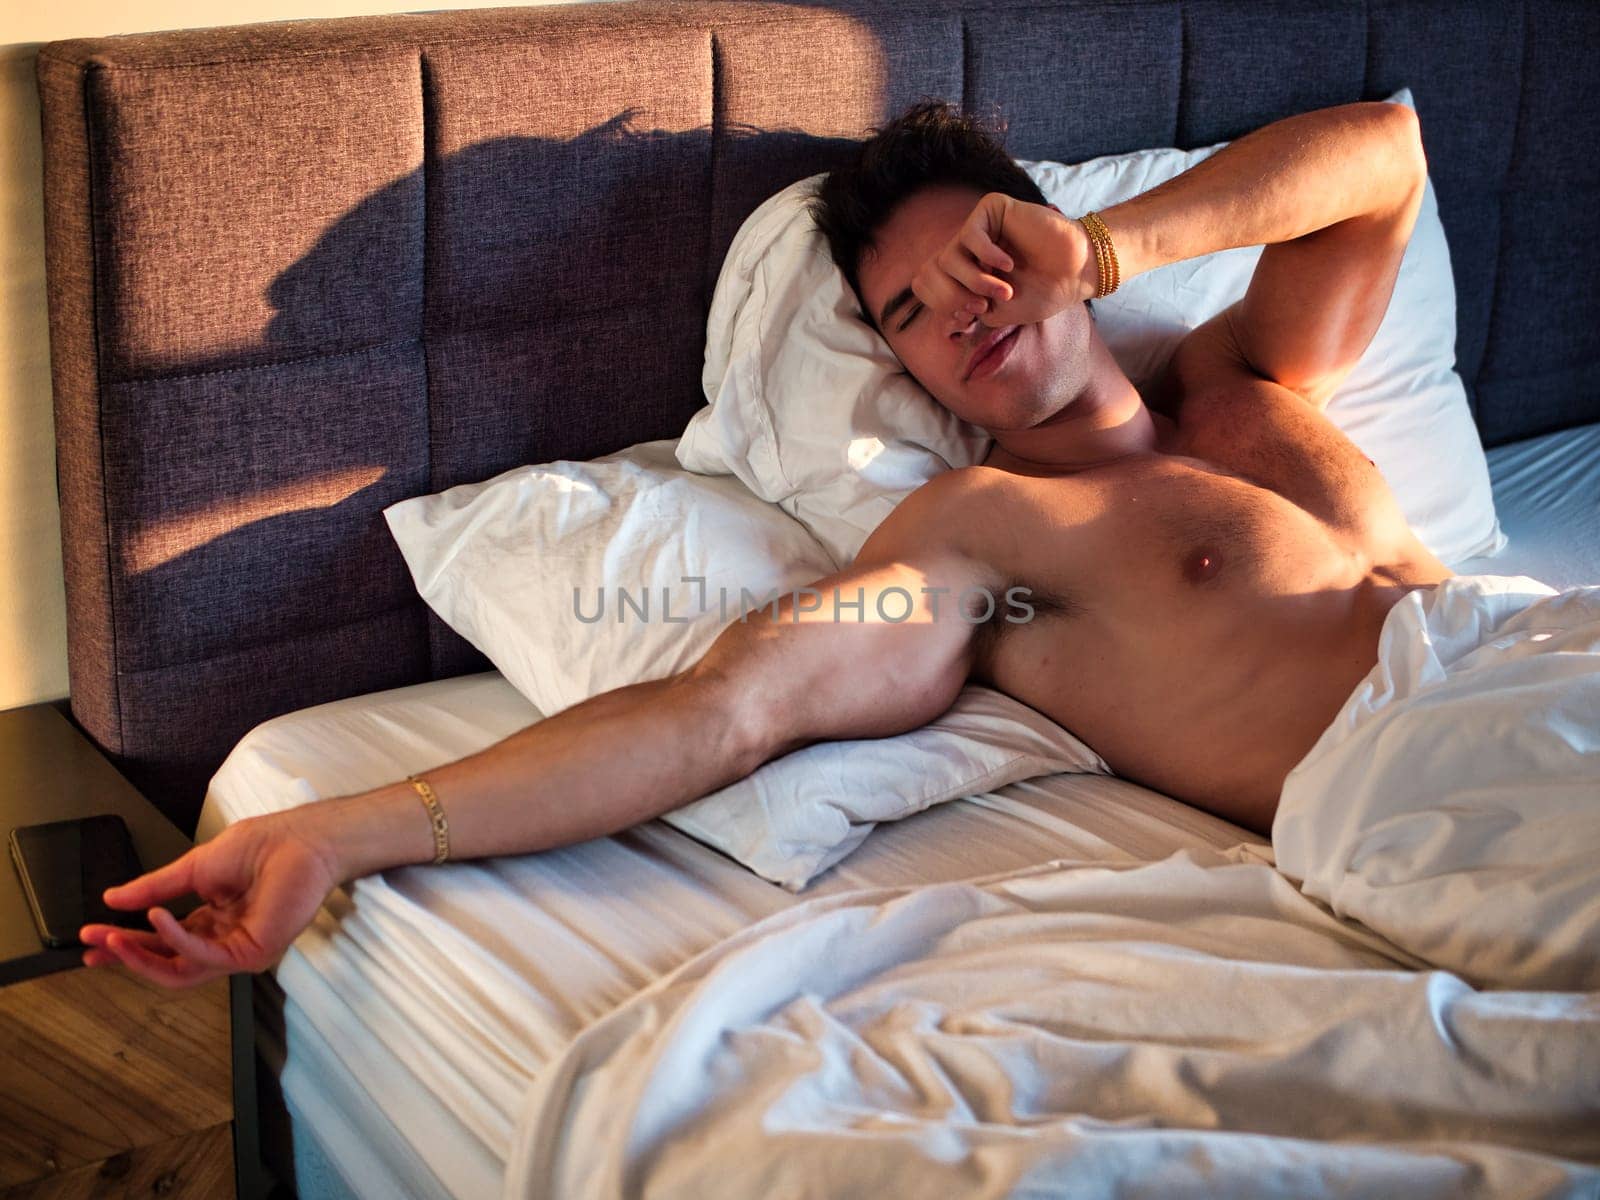 A shirtless man laying on a bed with white sheets, reaching for his cell phone to check his messages